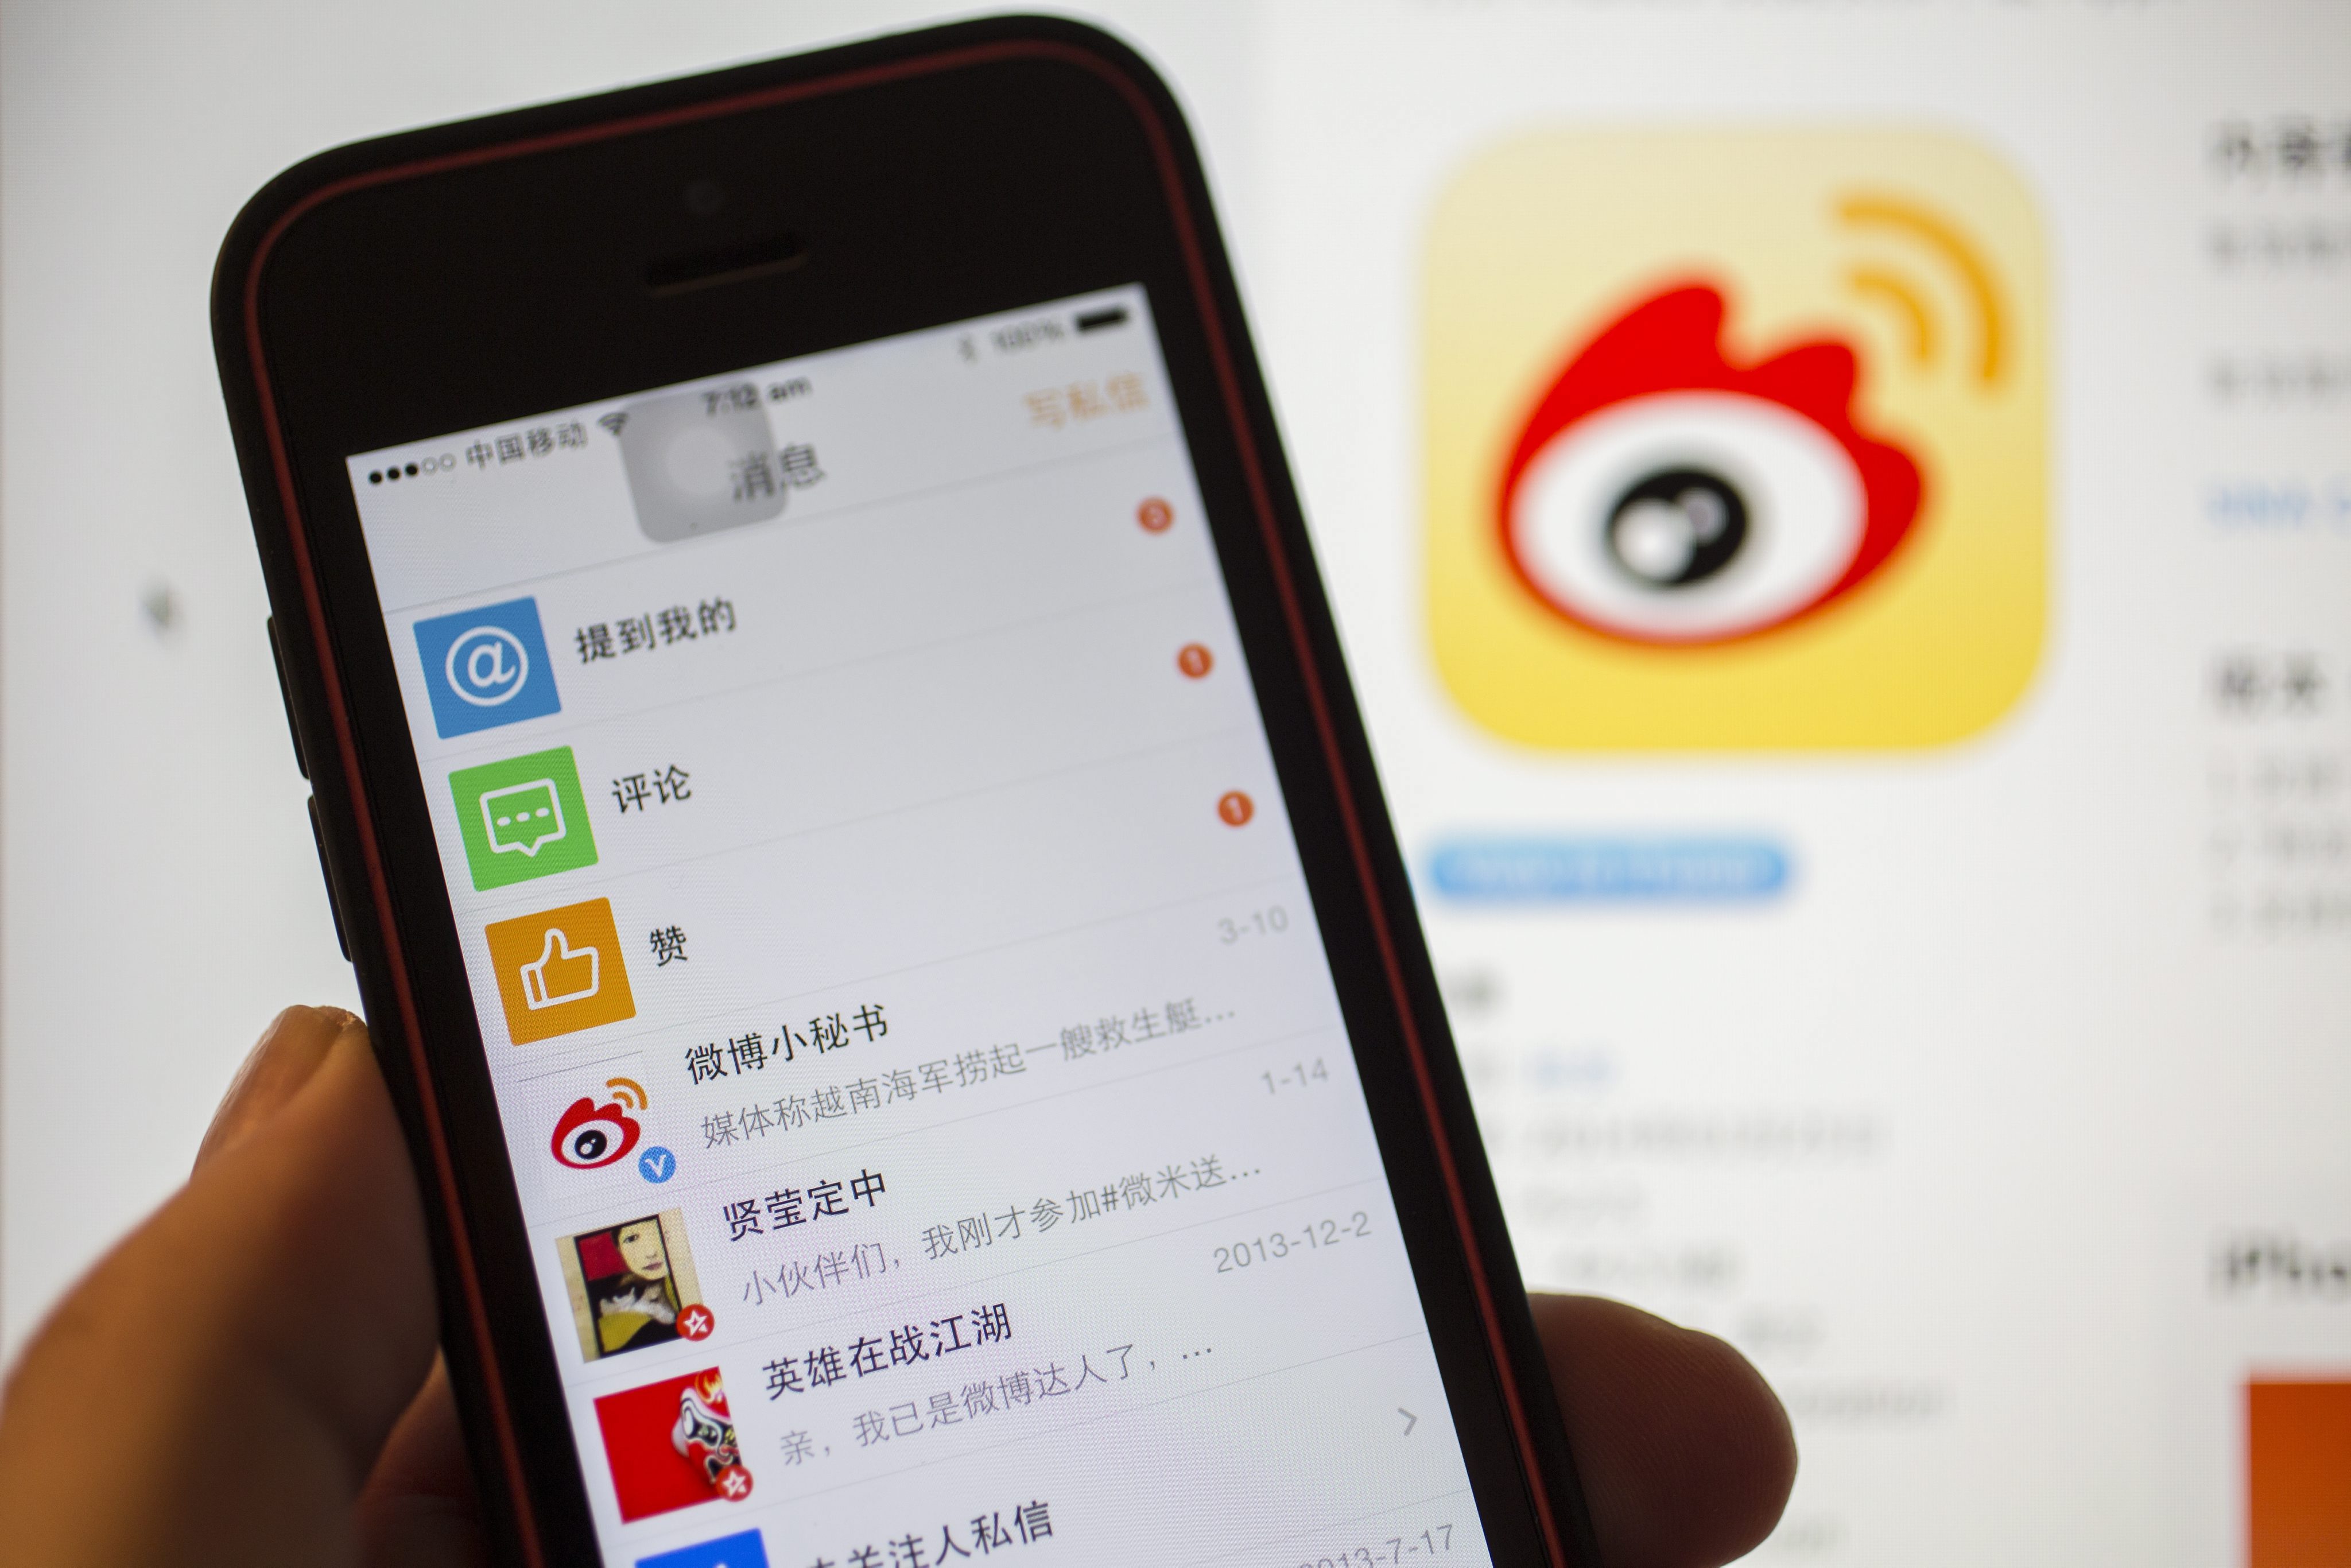 Nearly 60 per cent of “fabricated” news that was widely circulated last year in China originated from Weibo, China's Twitter. Photo: EPA